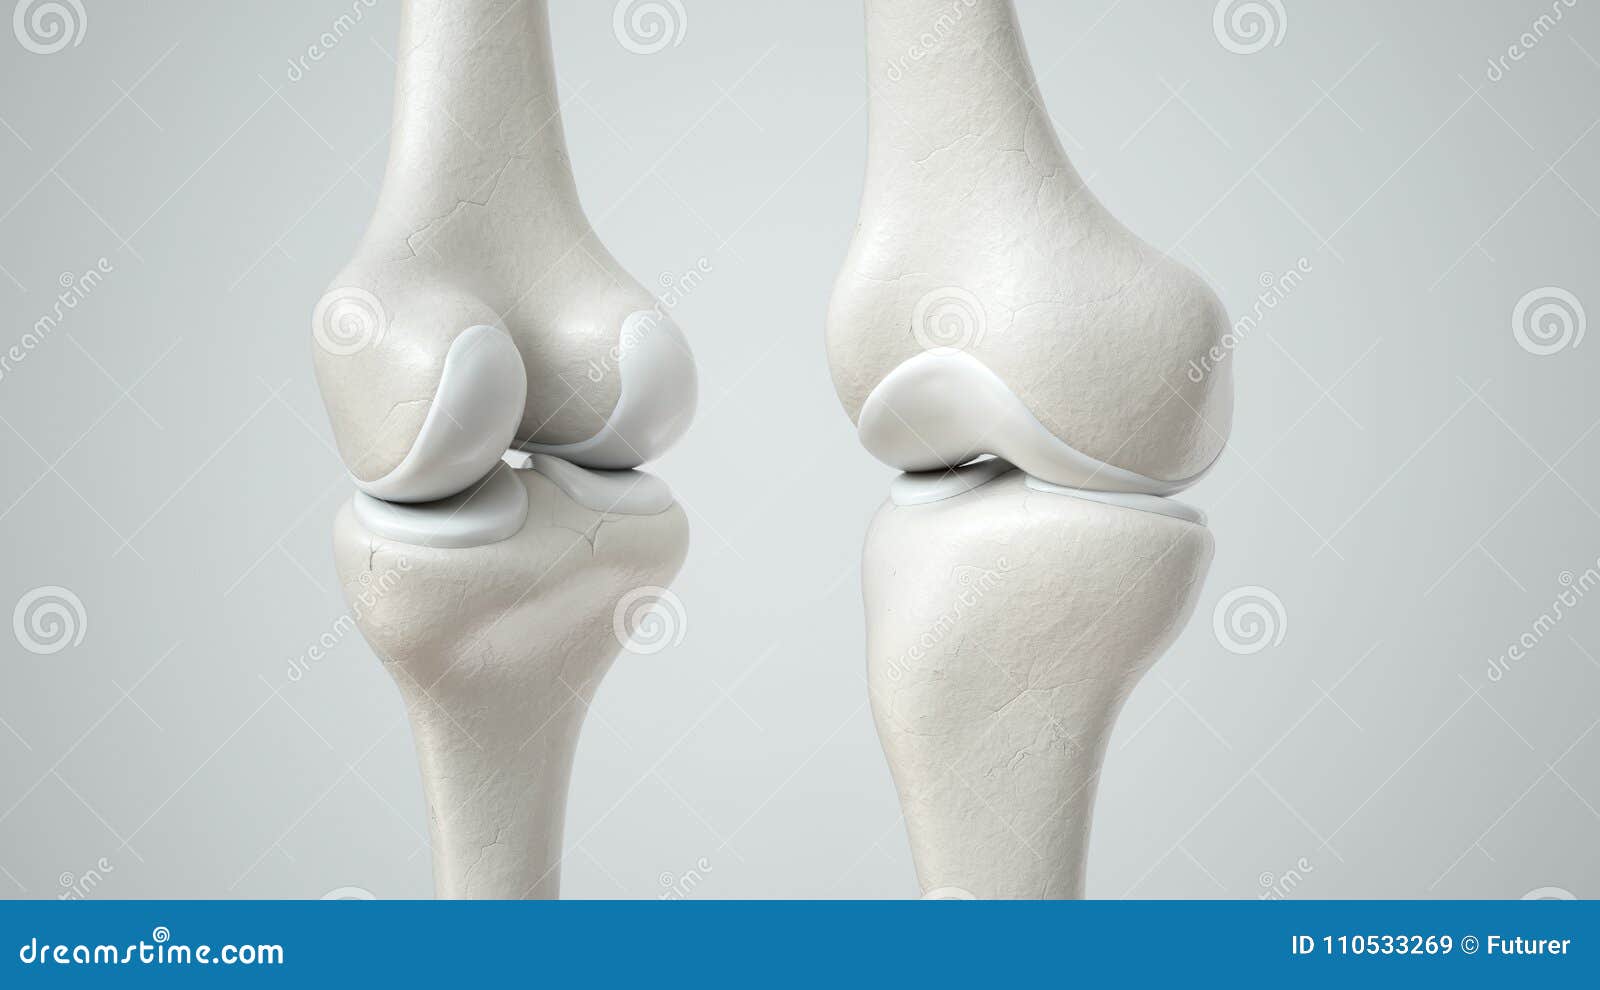 knee joint with healthy cartilage, front and back- 3d rendering